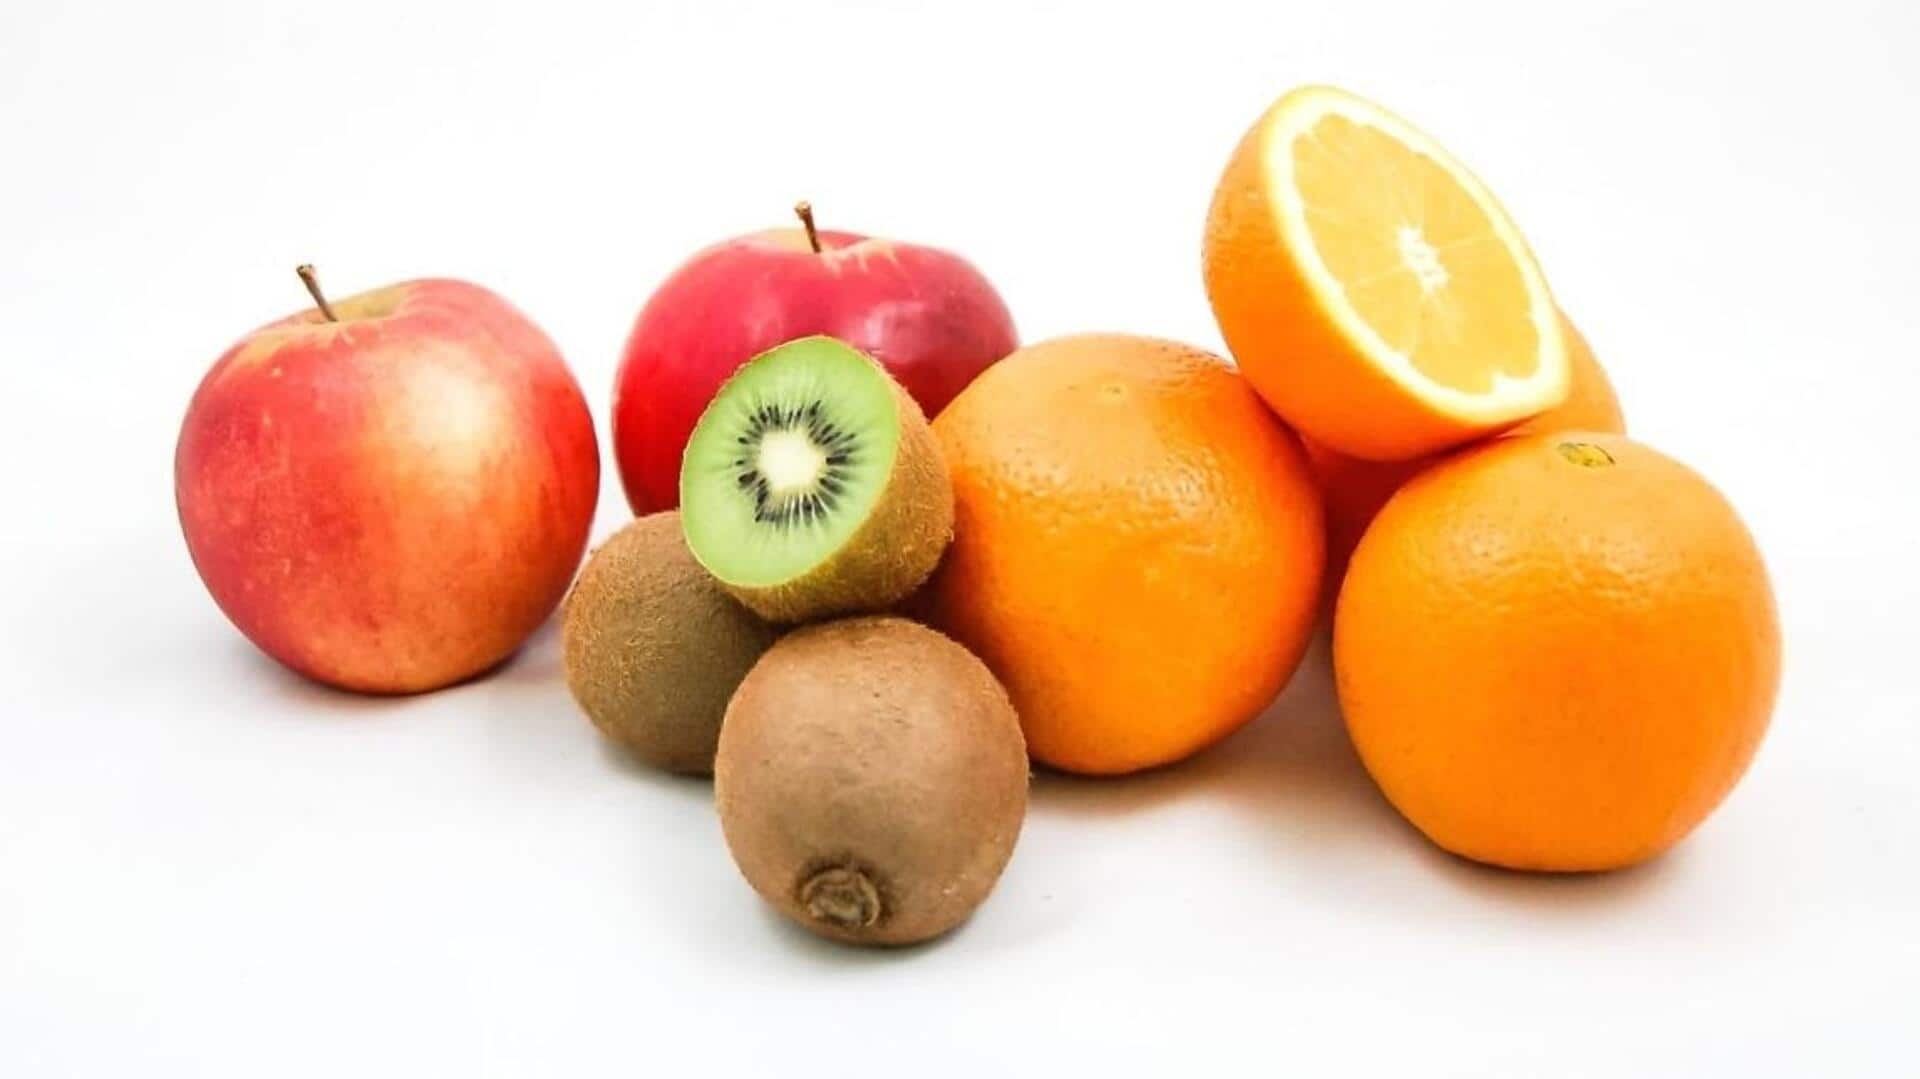 On a weight loss journey? Expert recommends eating these fruits